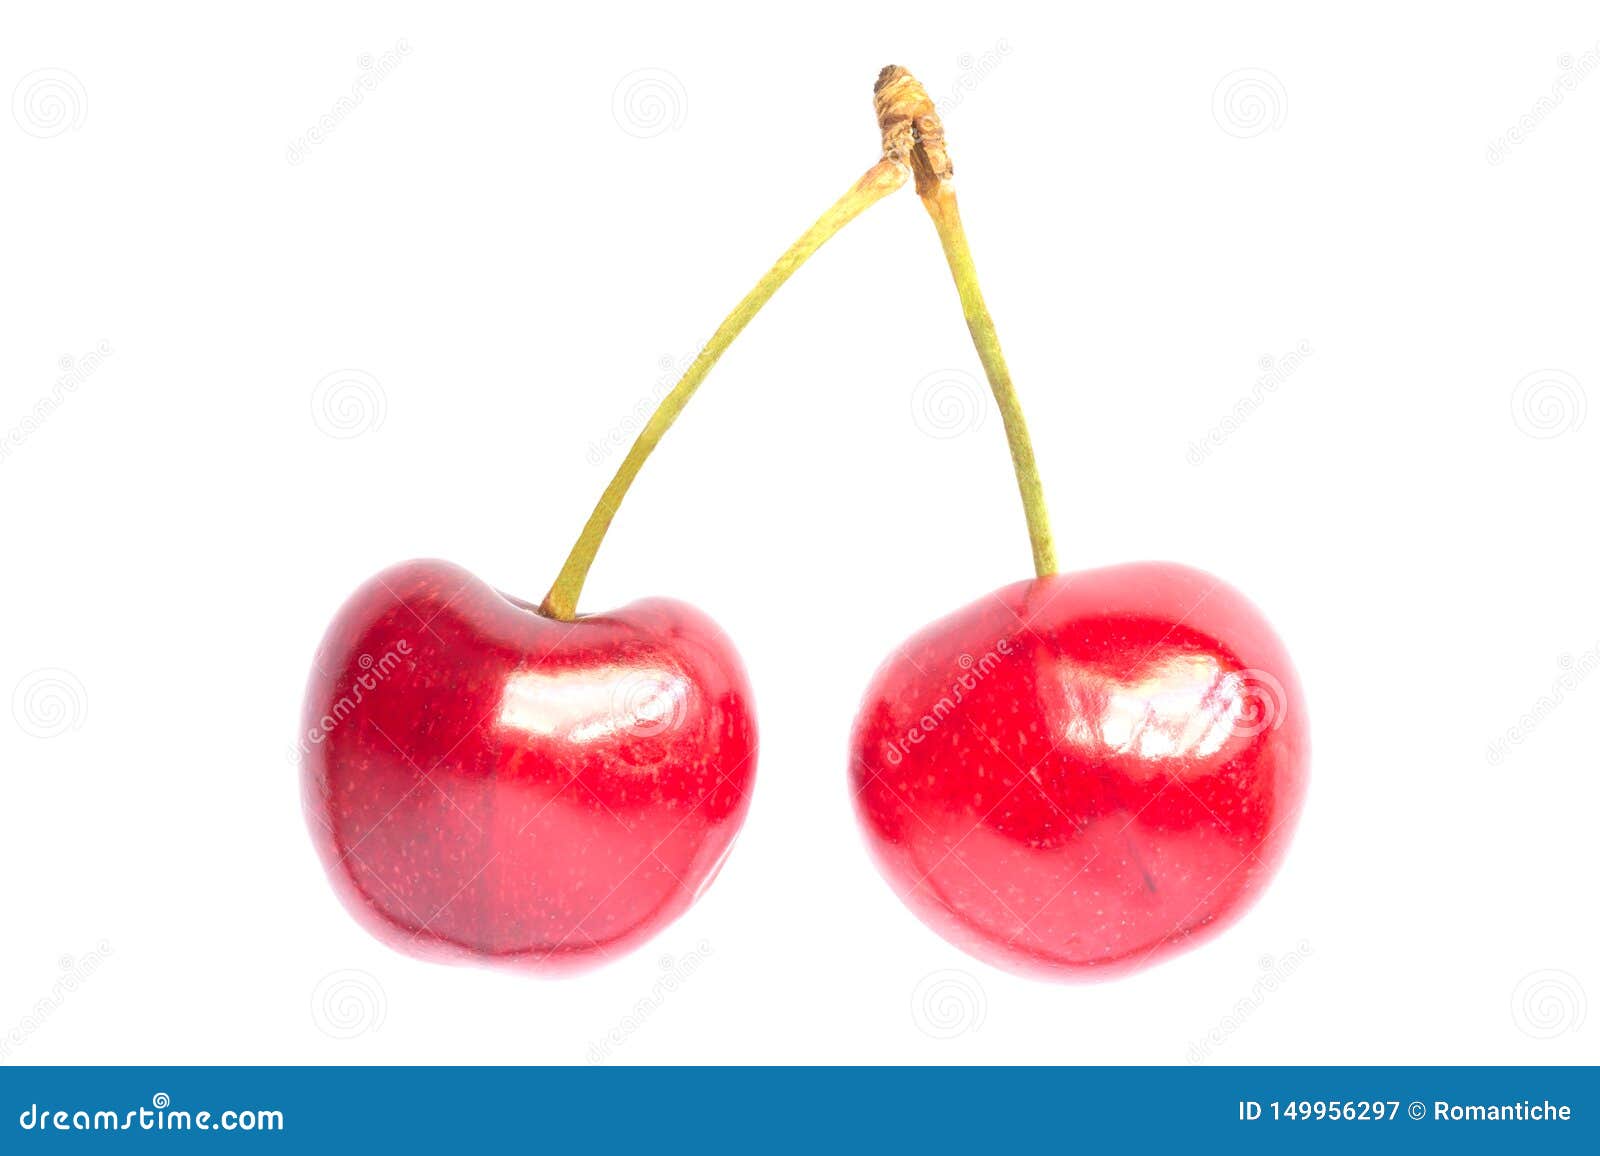 Pair of red ripe cherries stock image. Image of background - 149956297